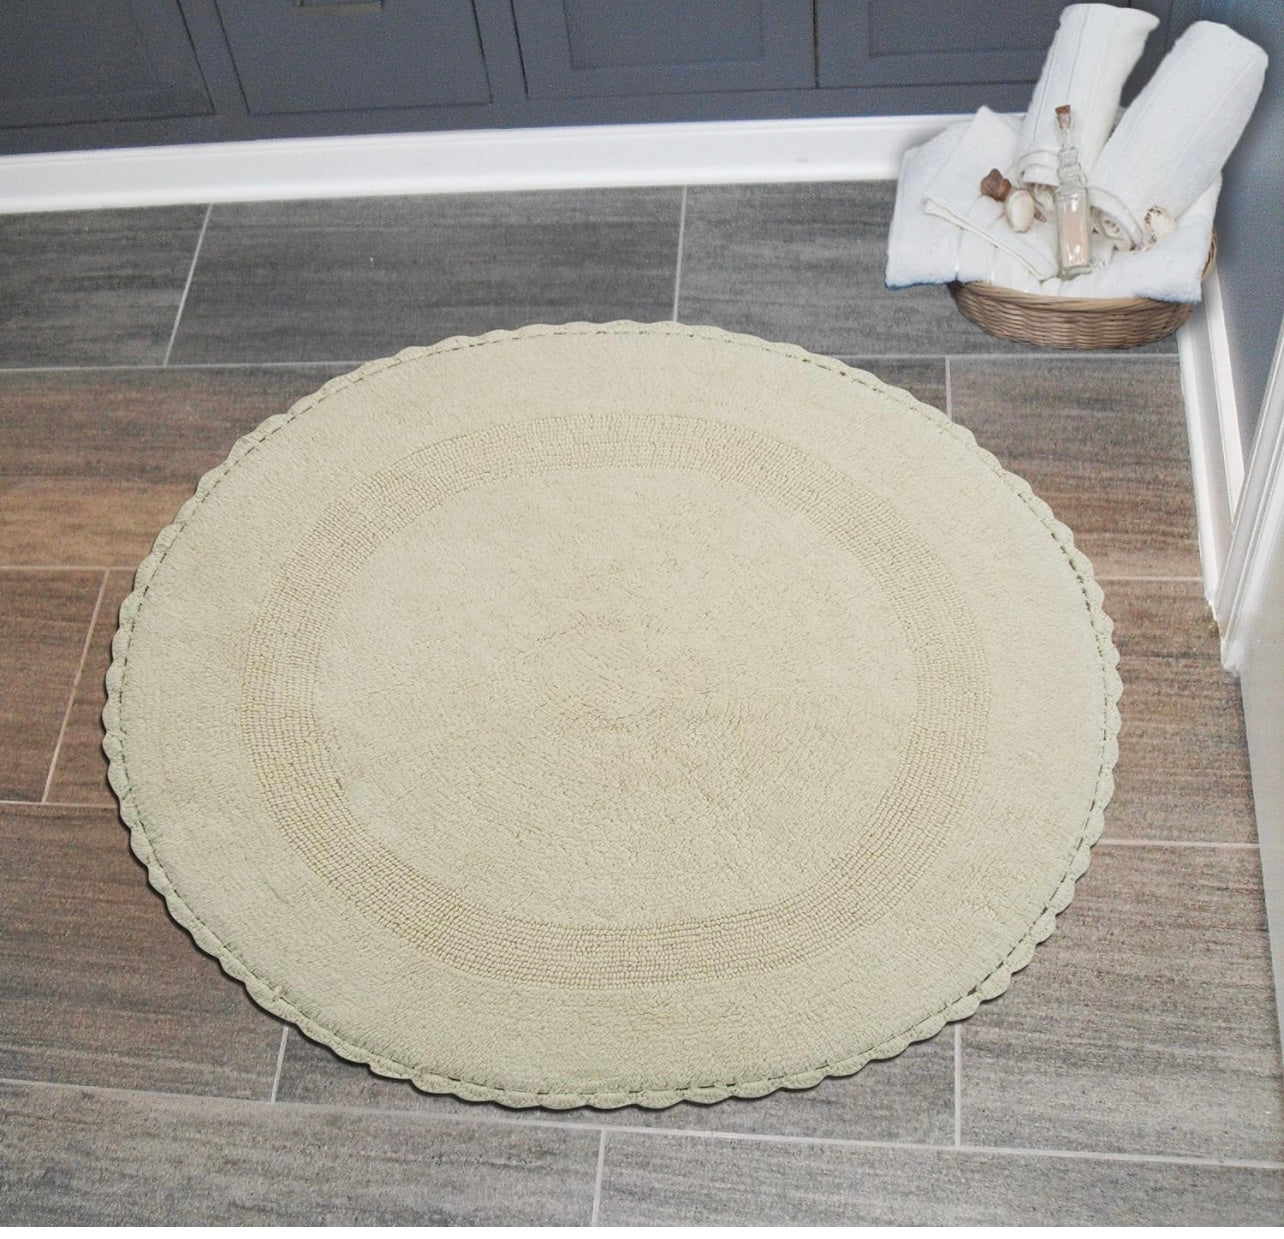 Saffron Fabs Bath Rug 100% Soft Cotton 36 Inch Round, Reversible-Different Pattern On Both Sides, Solid Ivory Color, Hand Knitted Crochet Lace Border, Hand Tufted, 200 GSF Weight, Machine Washable